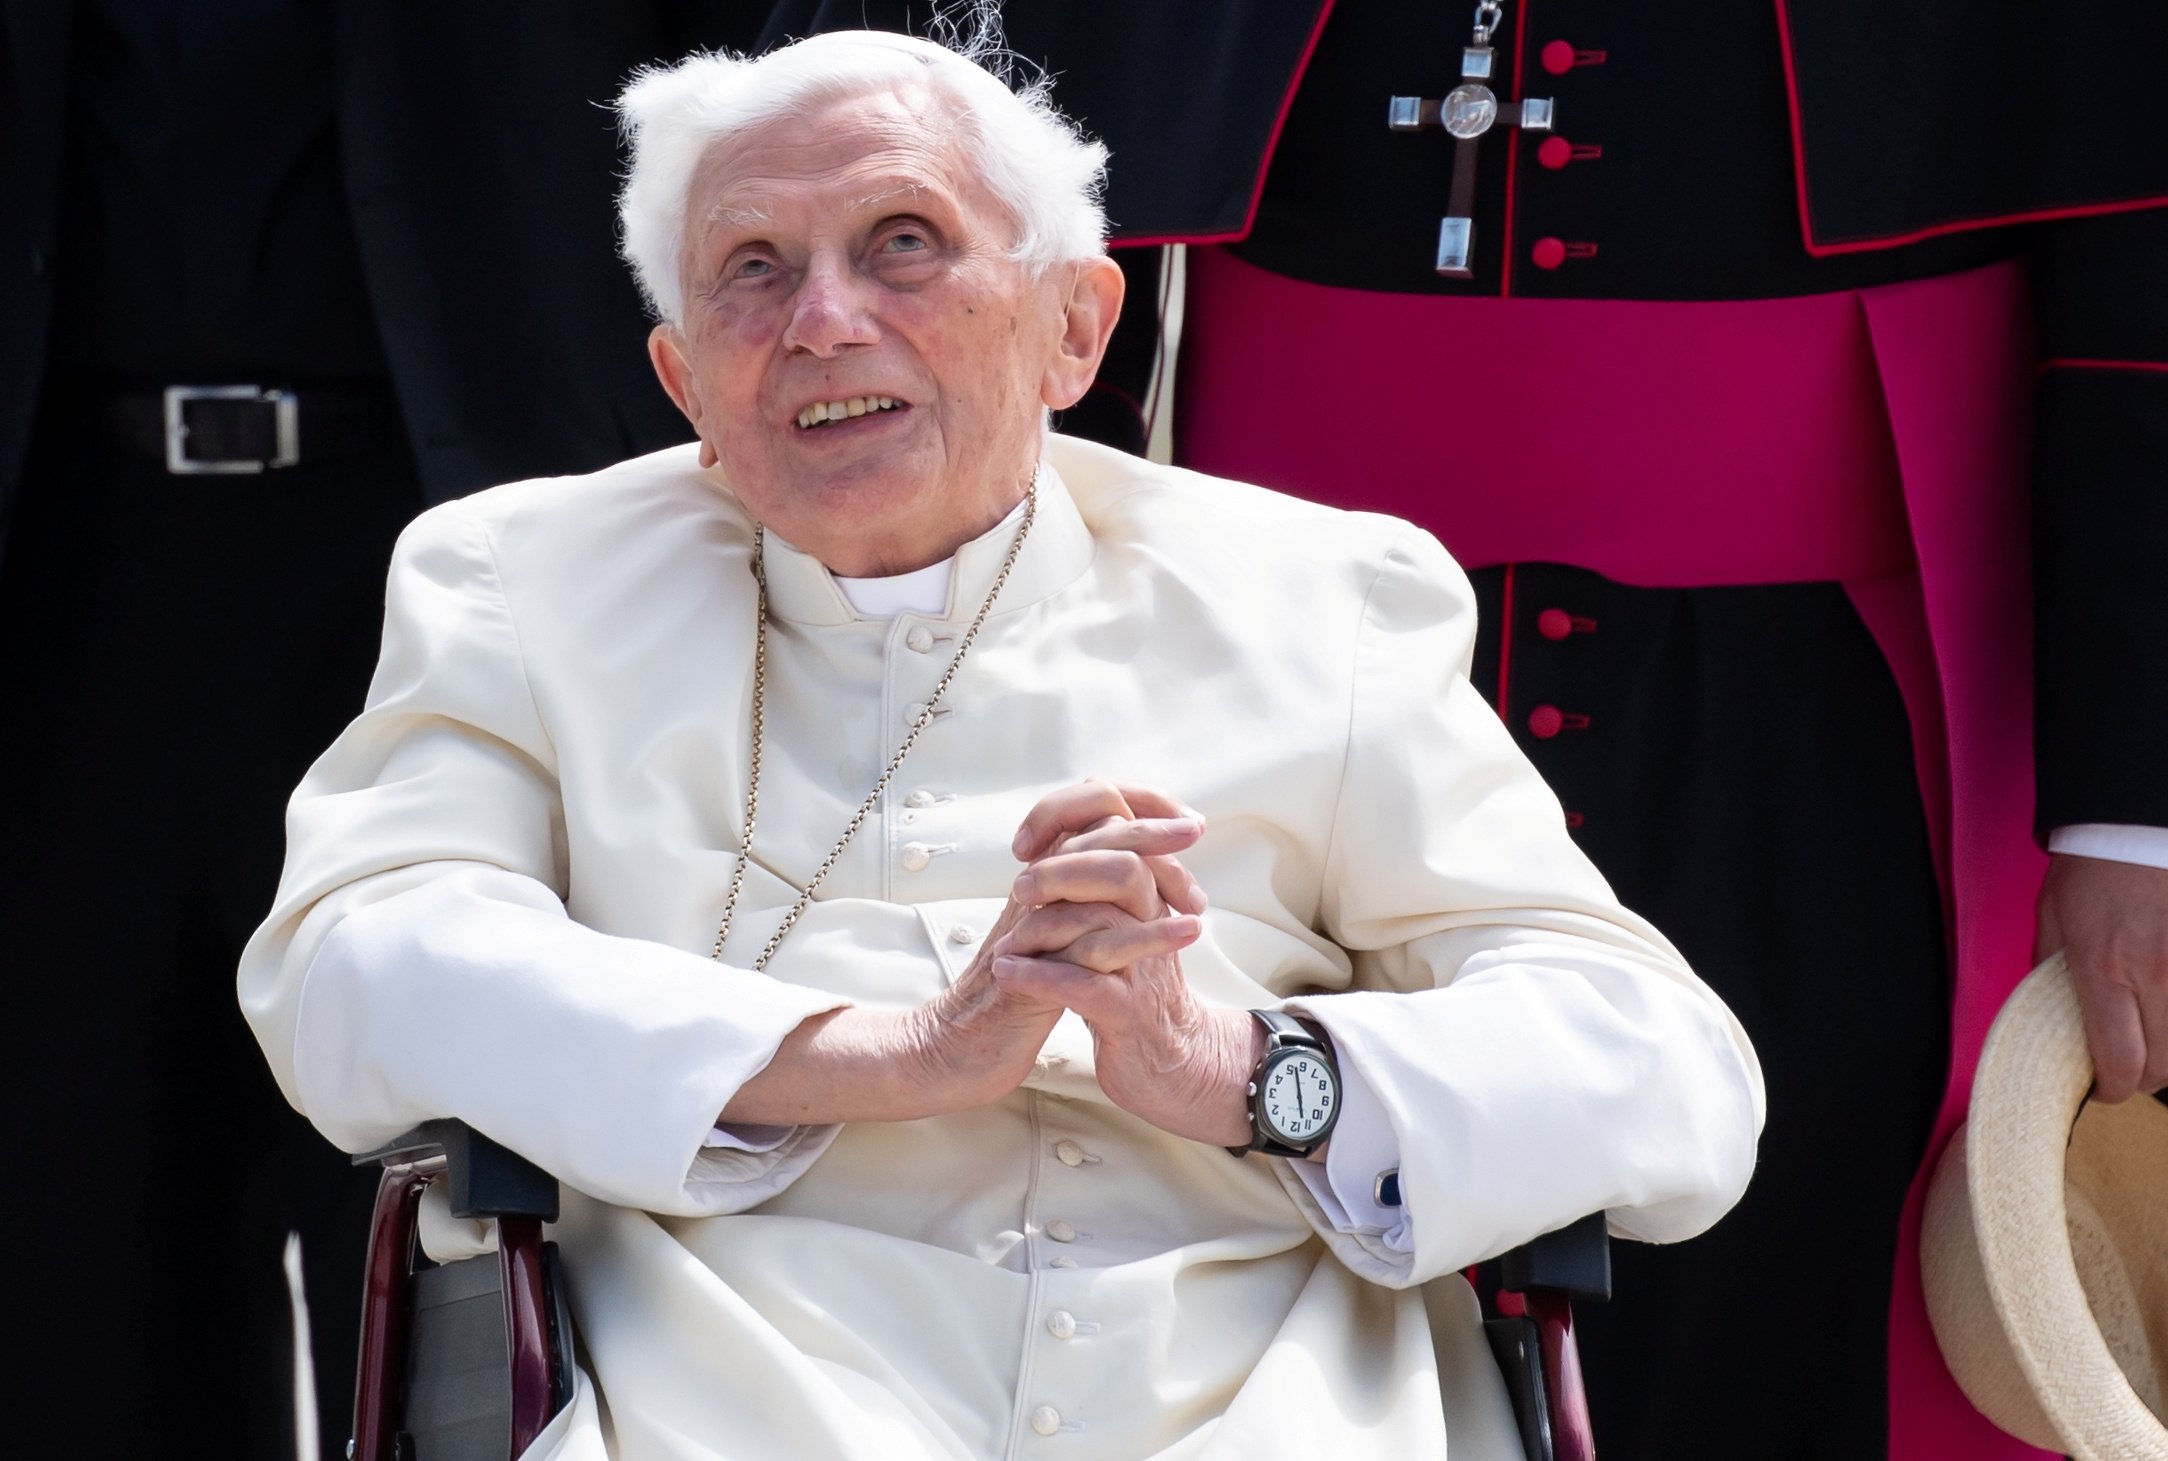 Retired Pope Benedict XVI smiles at Germany's Munich Airport before his departure to Rome June 22, 2020. The now-retired pope has criticized representatives of the Catholic Church in his home country, Germany. (CNS photo/Sven Hoppe, Reuters)